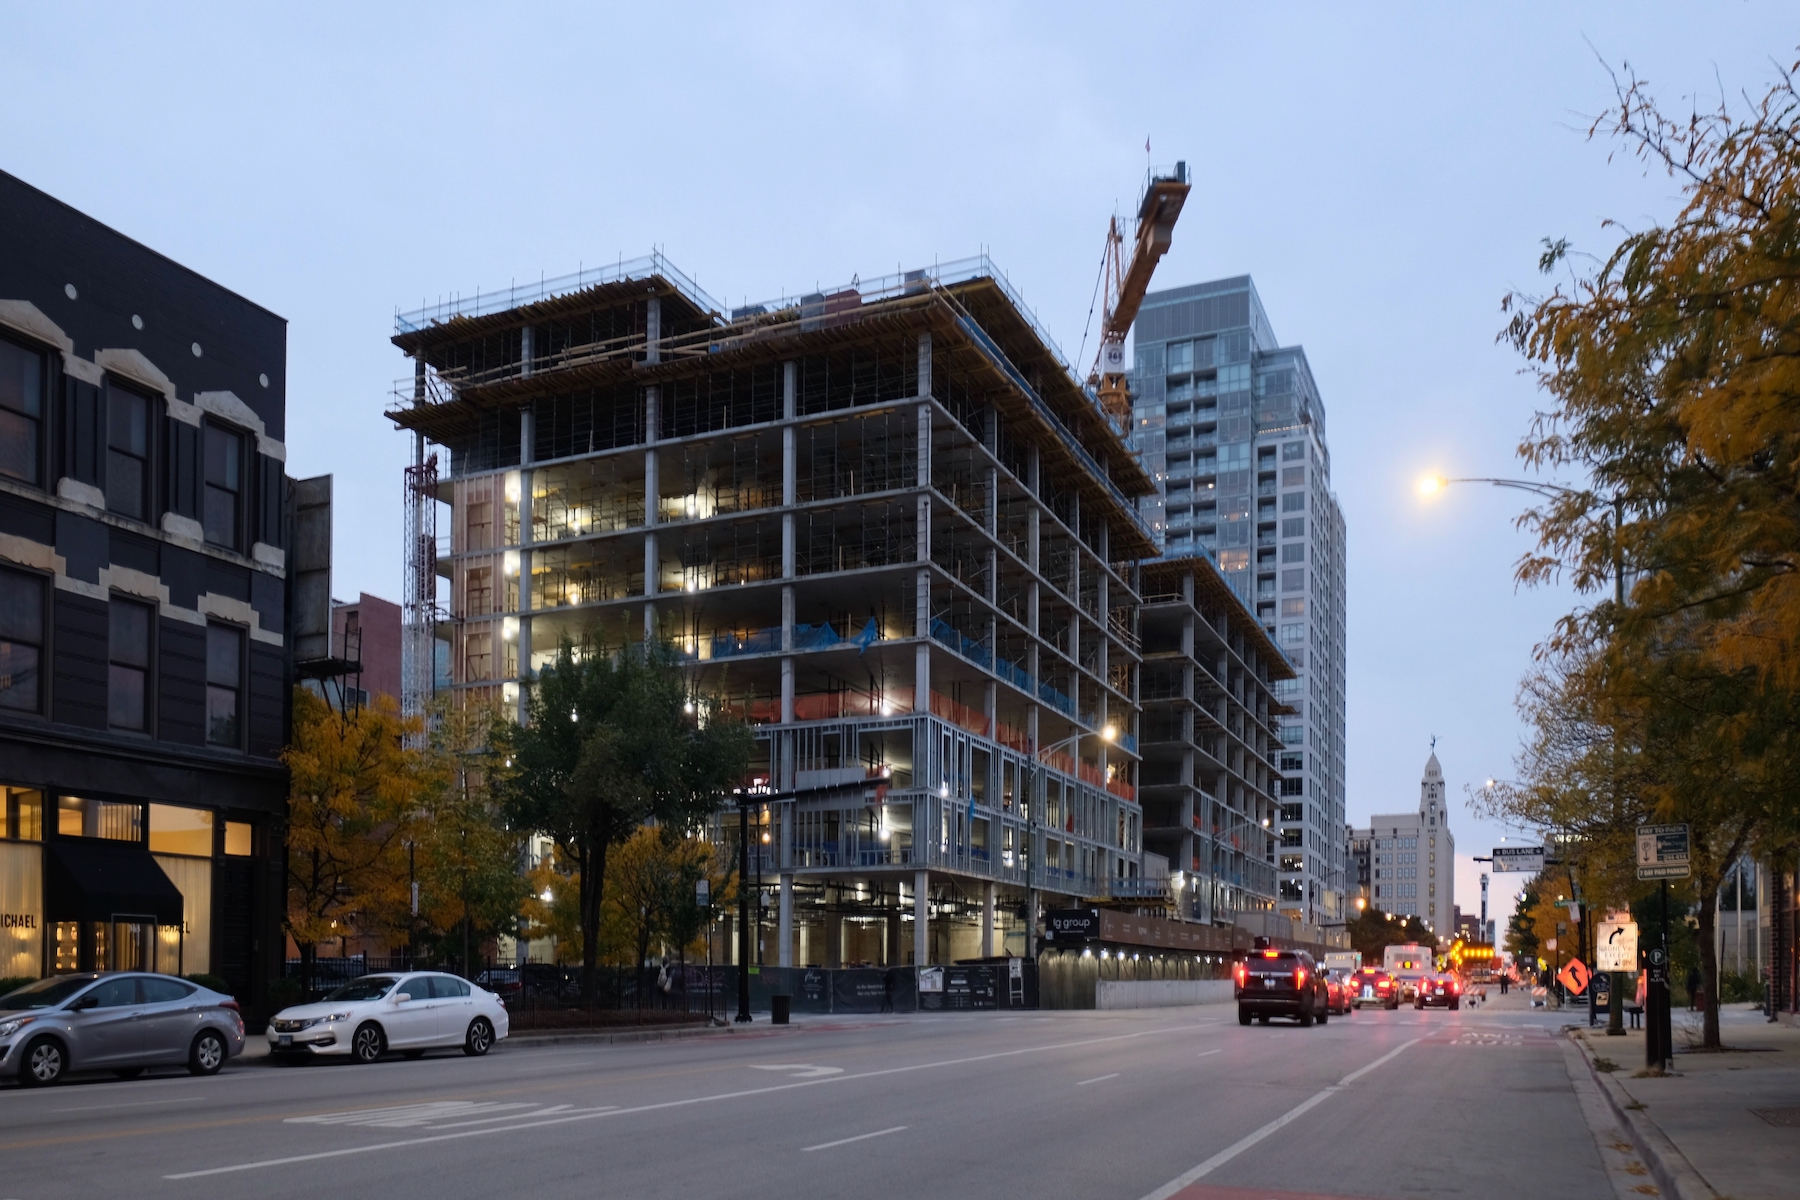 411 W Chicago Avenue (foreground) and 751 N Hudson Avenue (background)